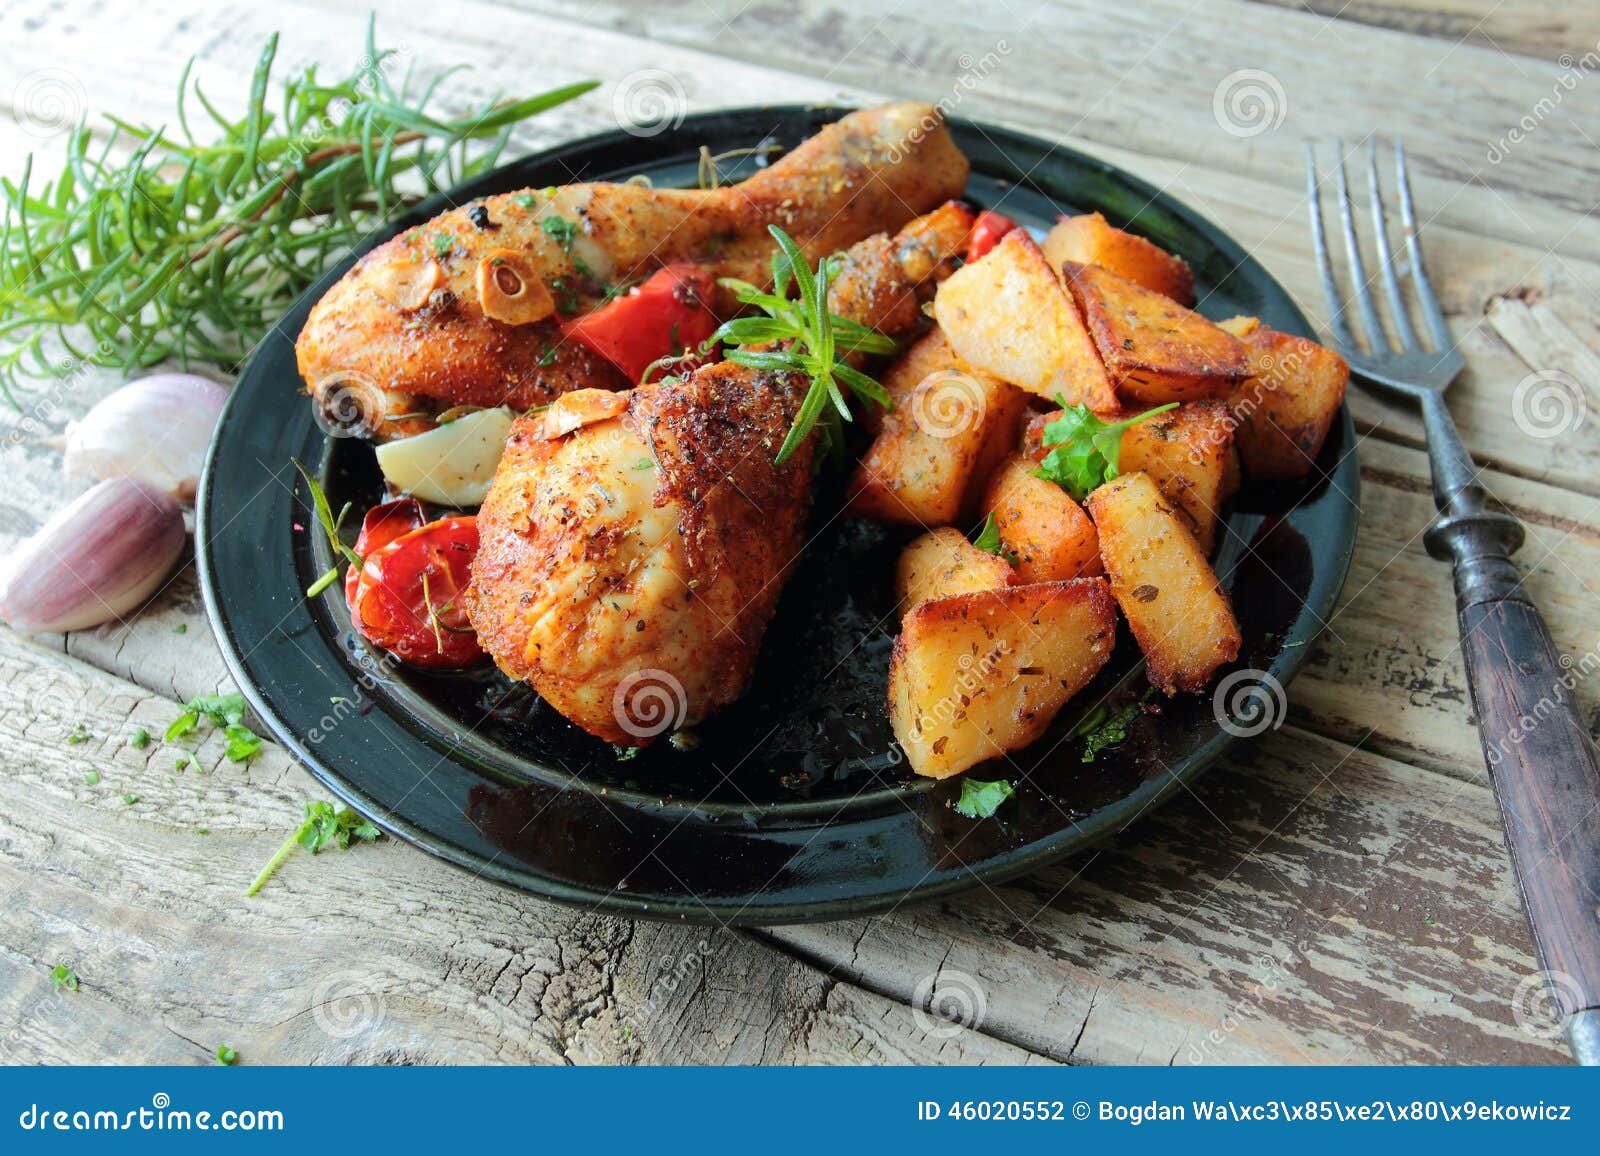 chicken lega with potatoes chips